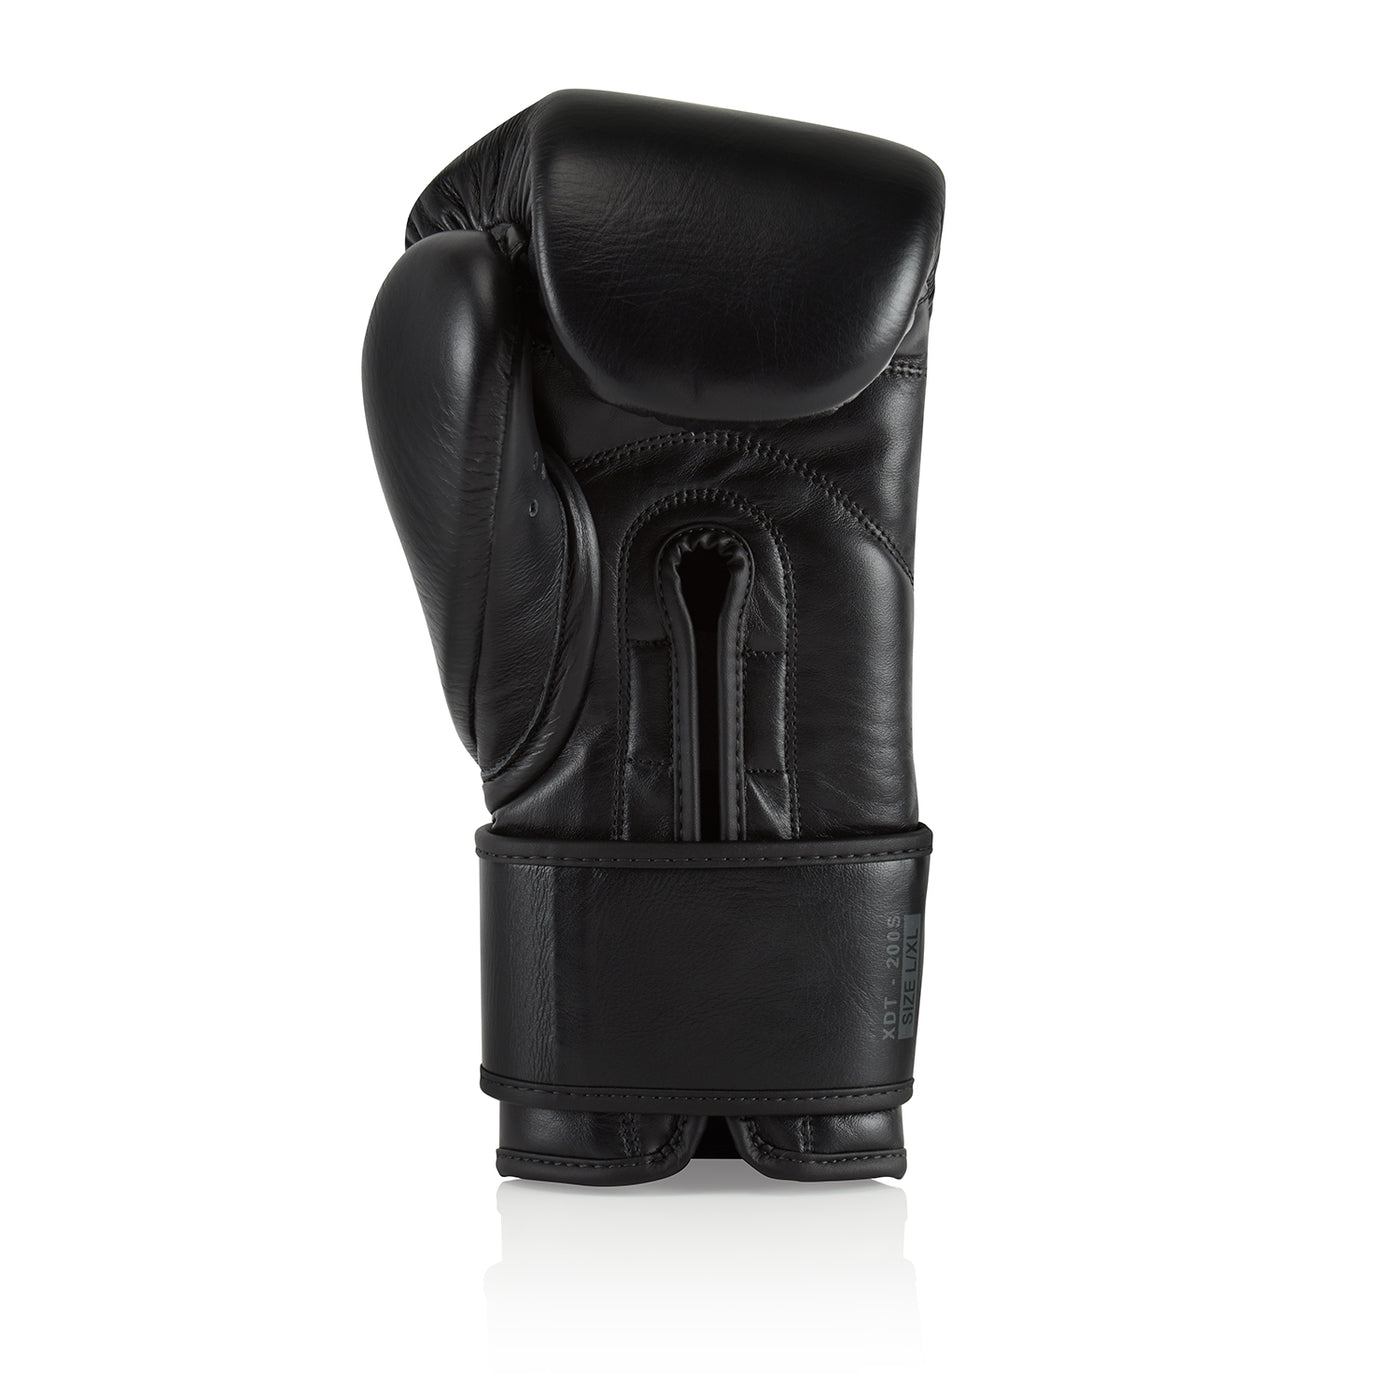 XDT-200S Contest Training Gloves